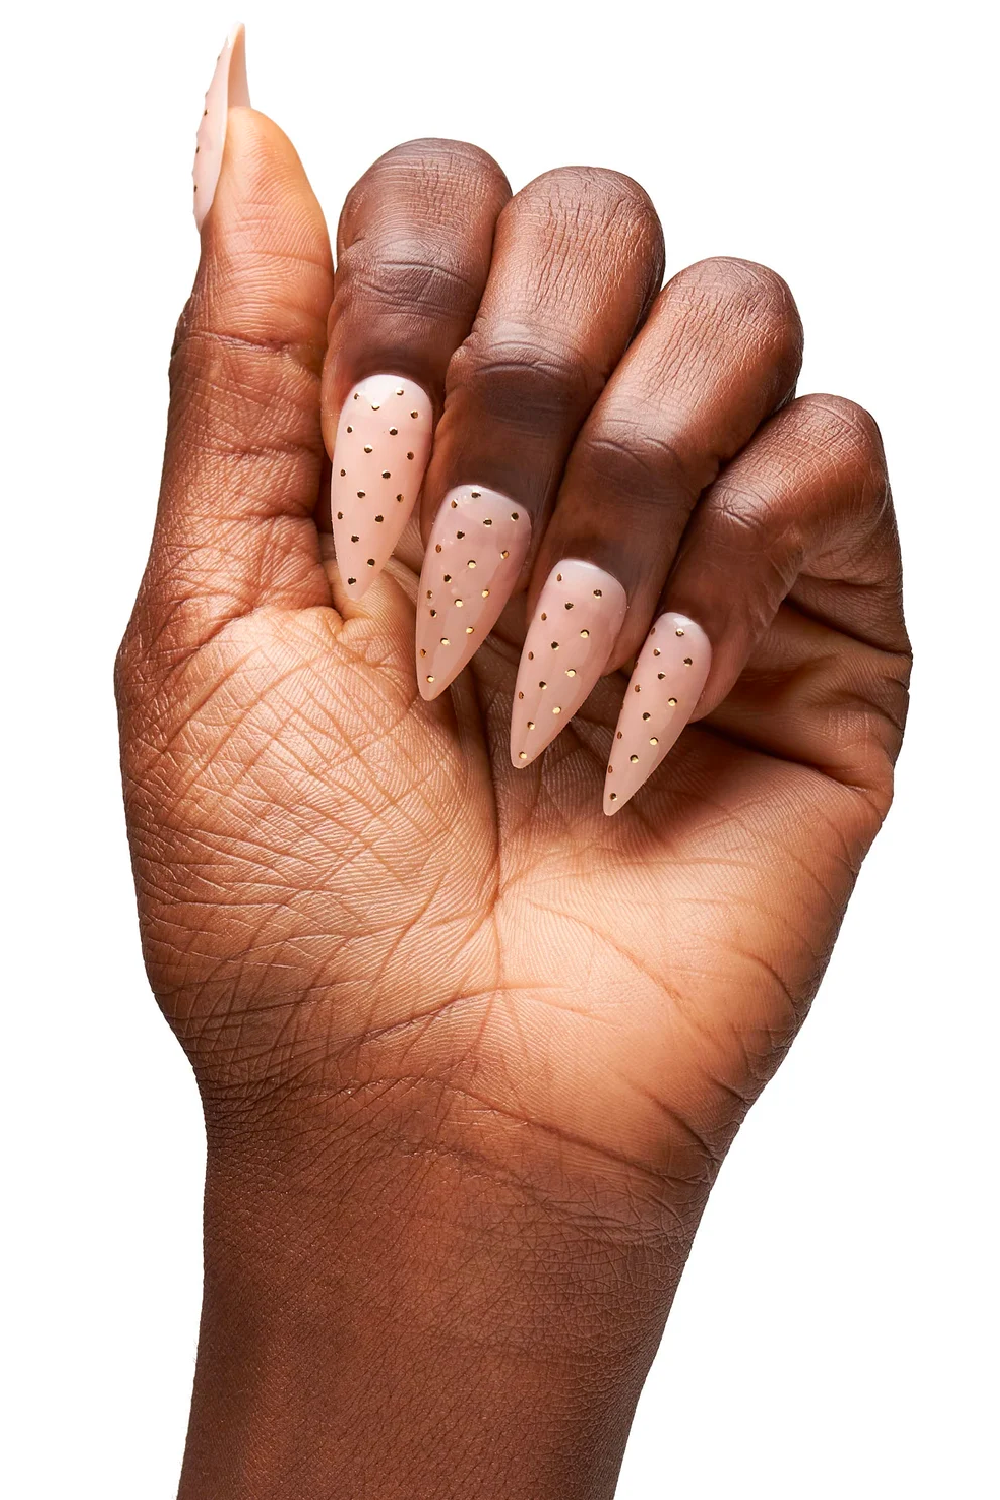 12 Best Press-On Nails Sets (Tested & Reviewed for 2023)